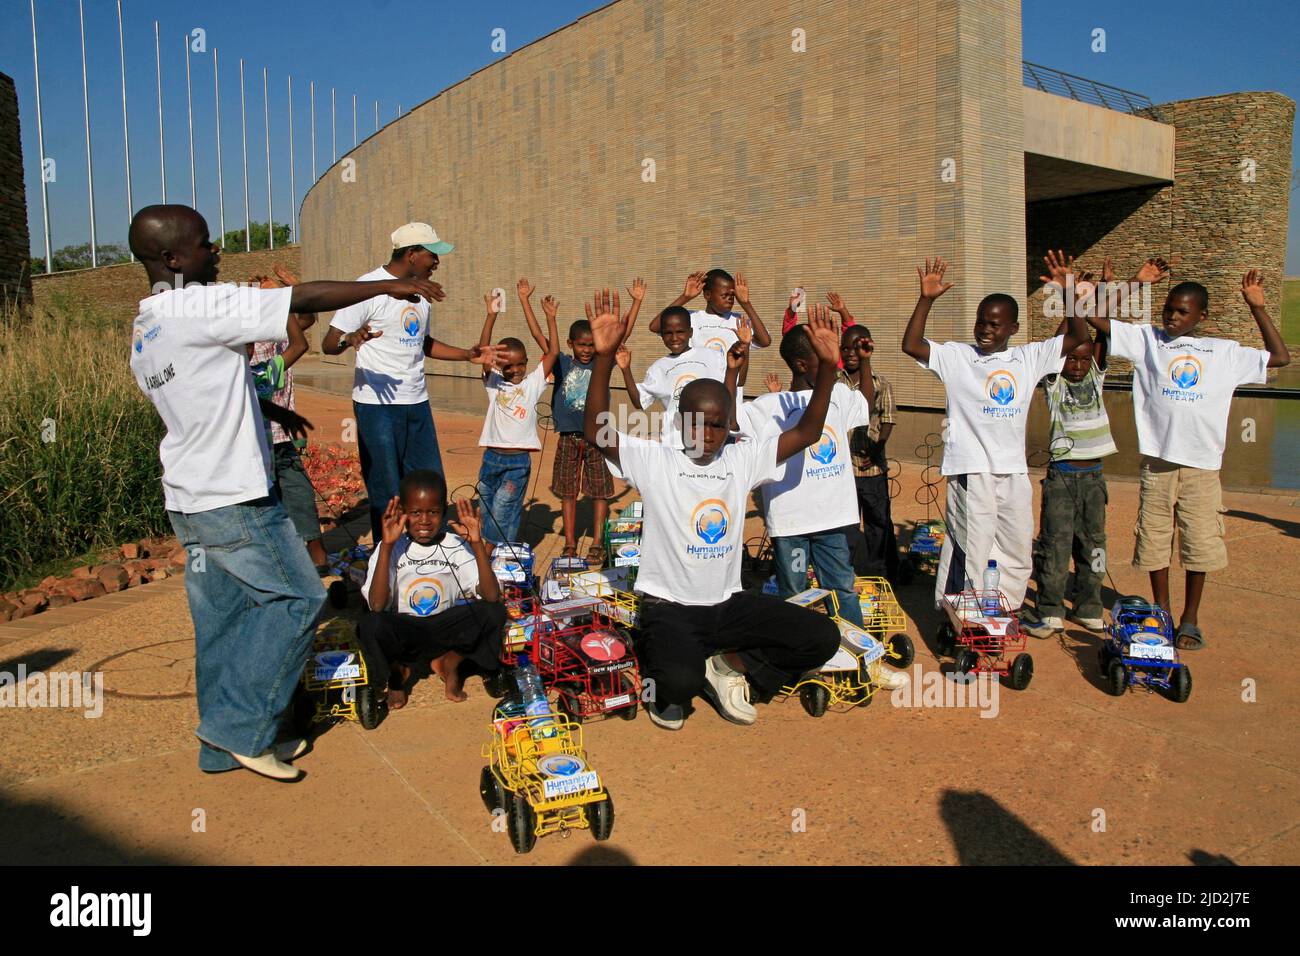 Members of the Humanity's Team South Africa at International Gathering at the Freedom Park, Pretoria/Tshwane, Gauteng, South Africa. Stock Photo